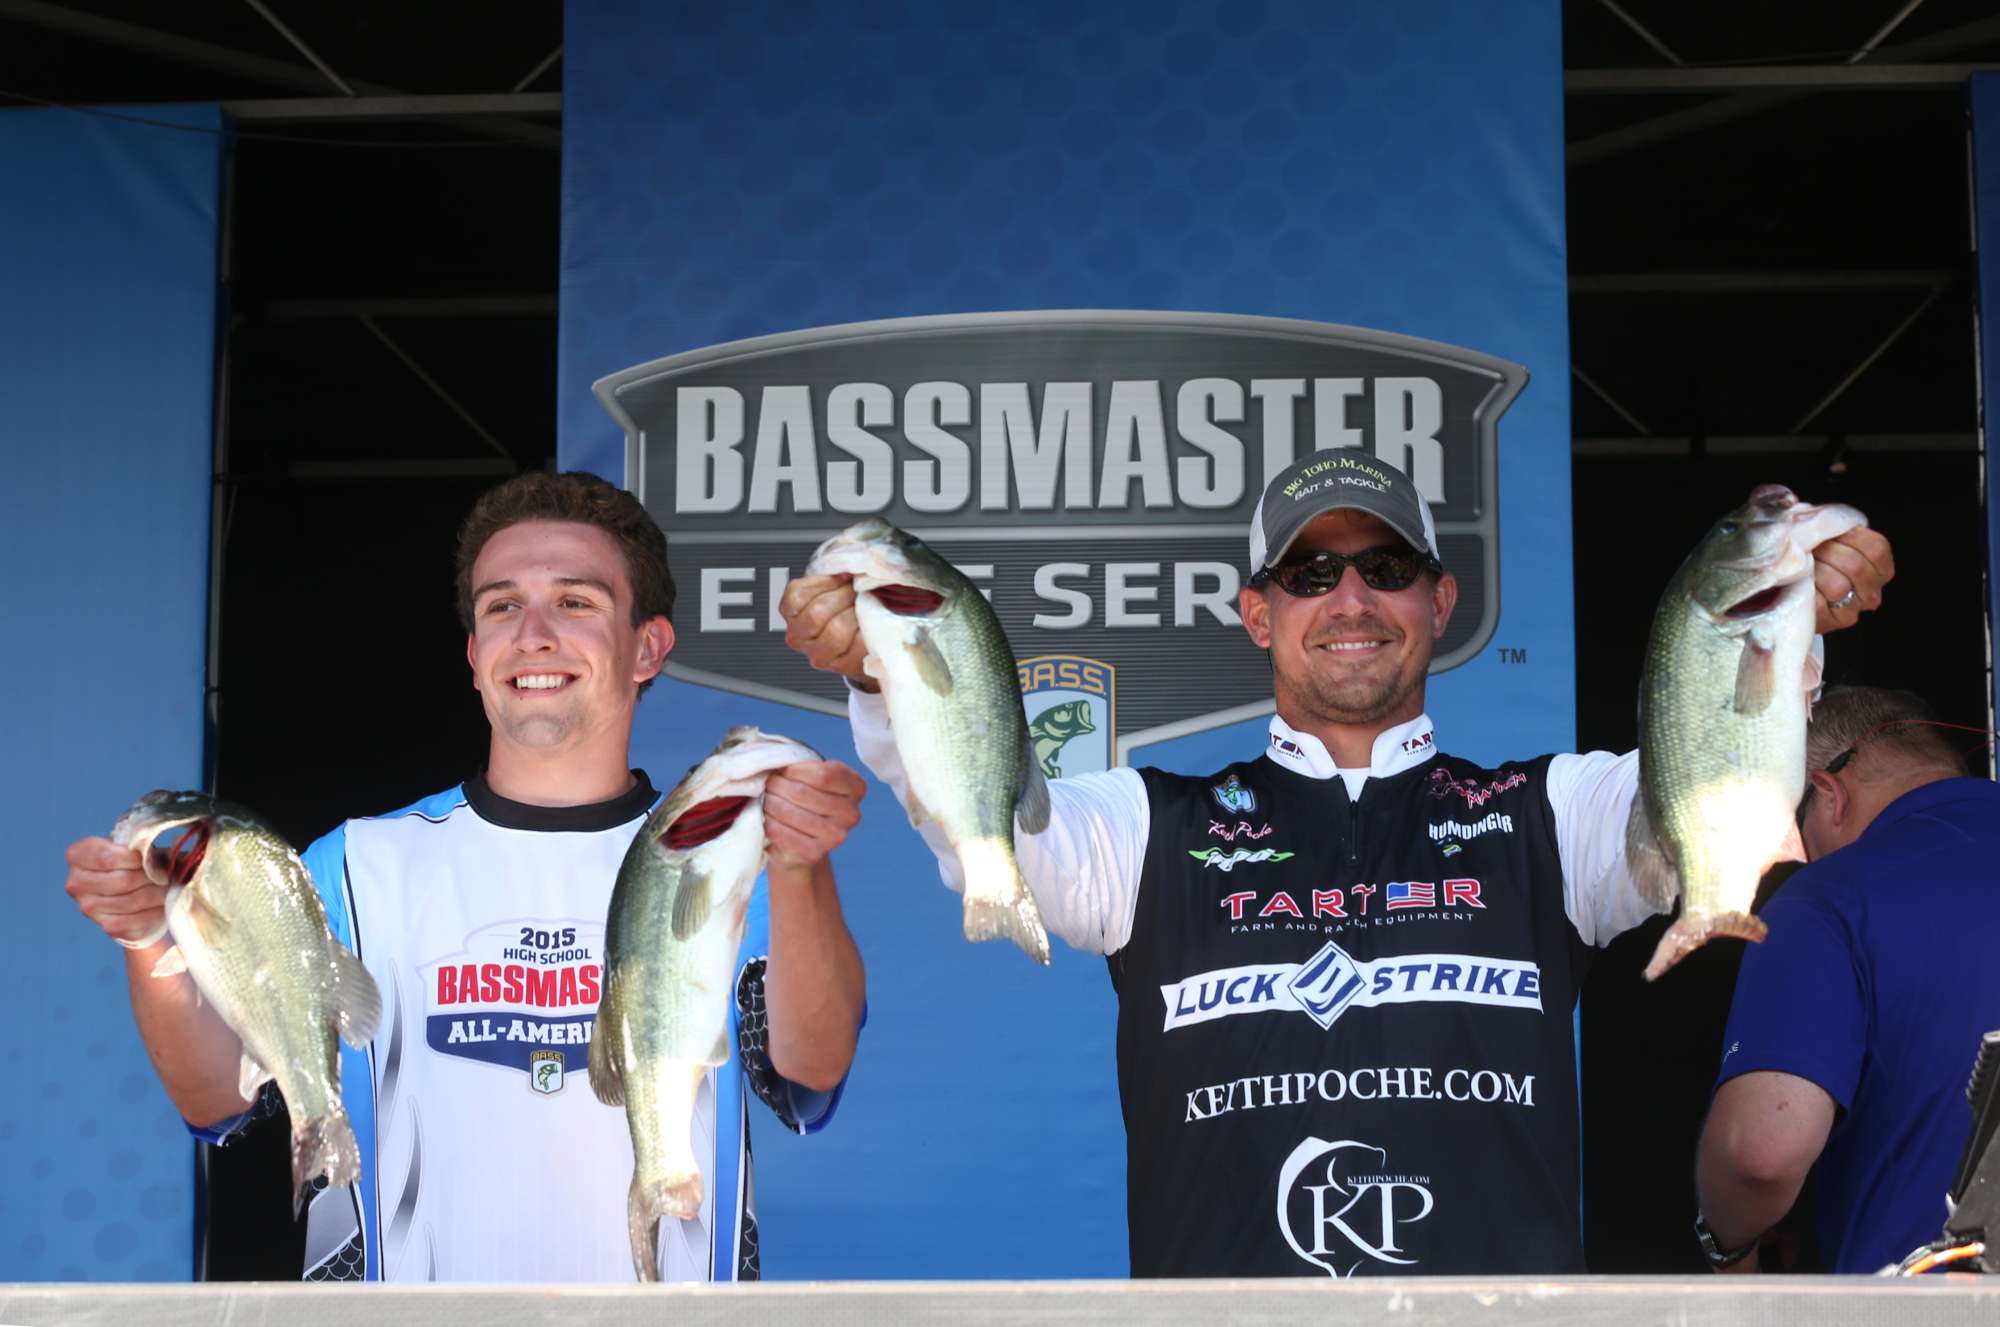 The last team to weigh in was Elite Series pro Keith Poche and Nick Montilino. They only had four fish, but they were the right kind. After what seemed like an eternity, the scales finally settled on 13-15 â¦ putting the pair just ounces out of first place.